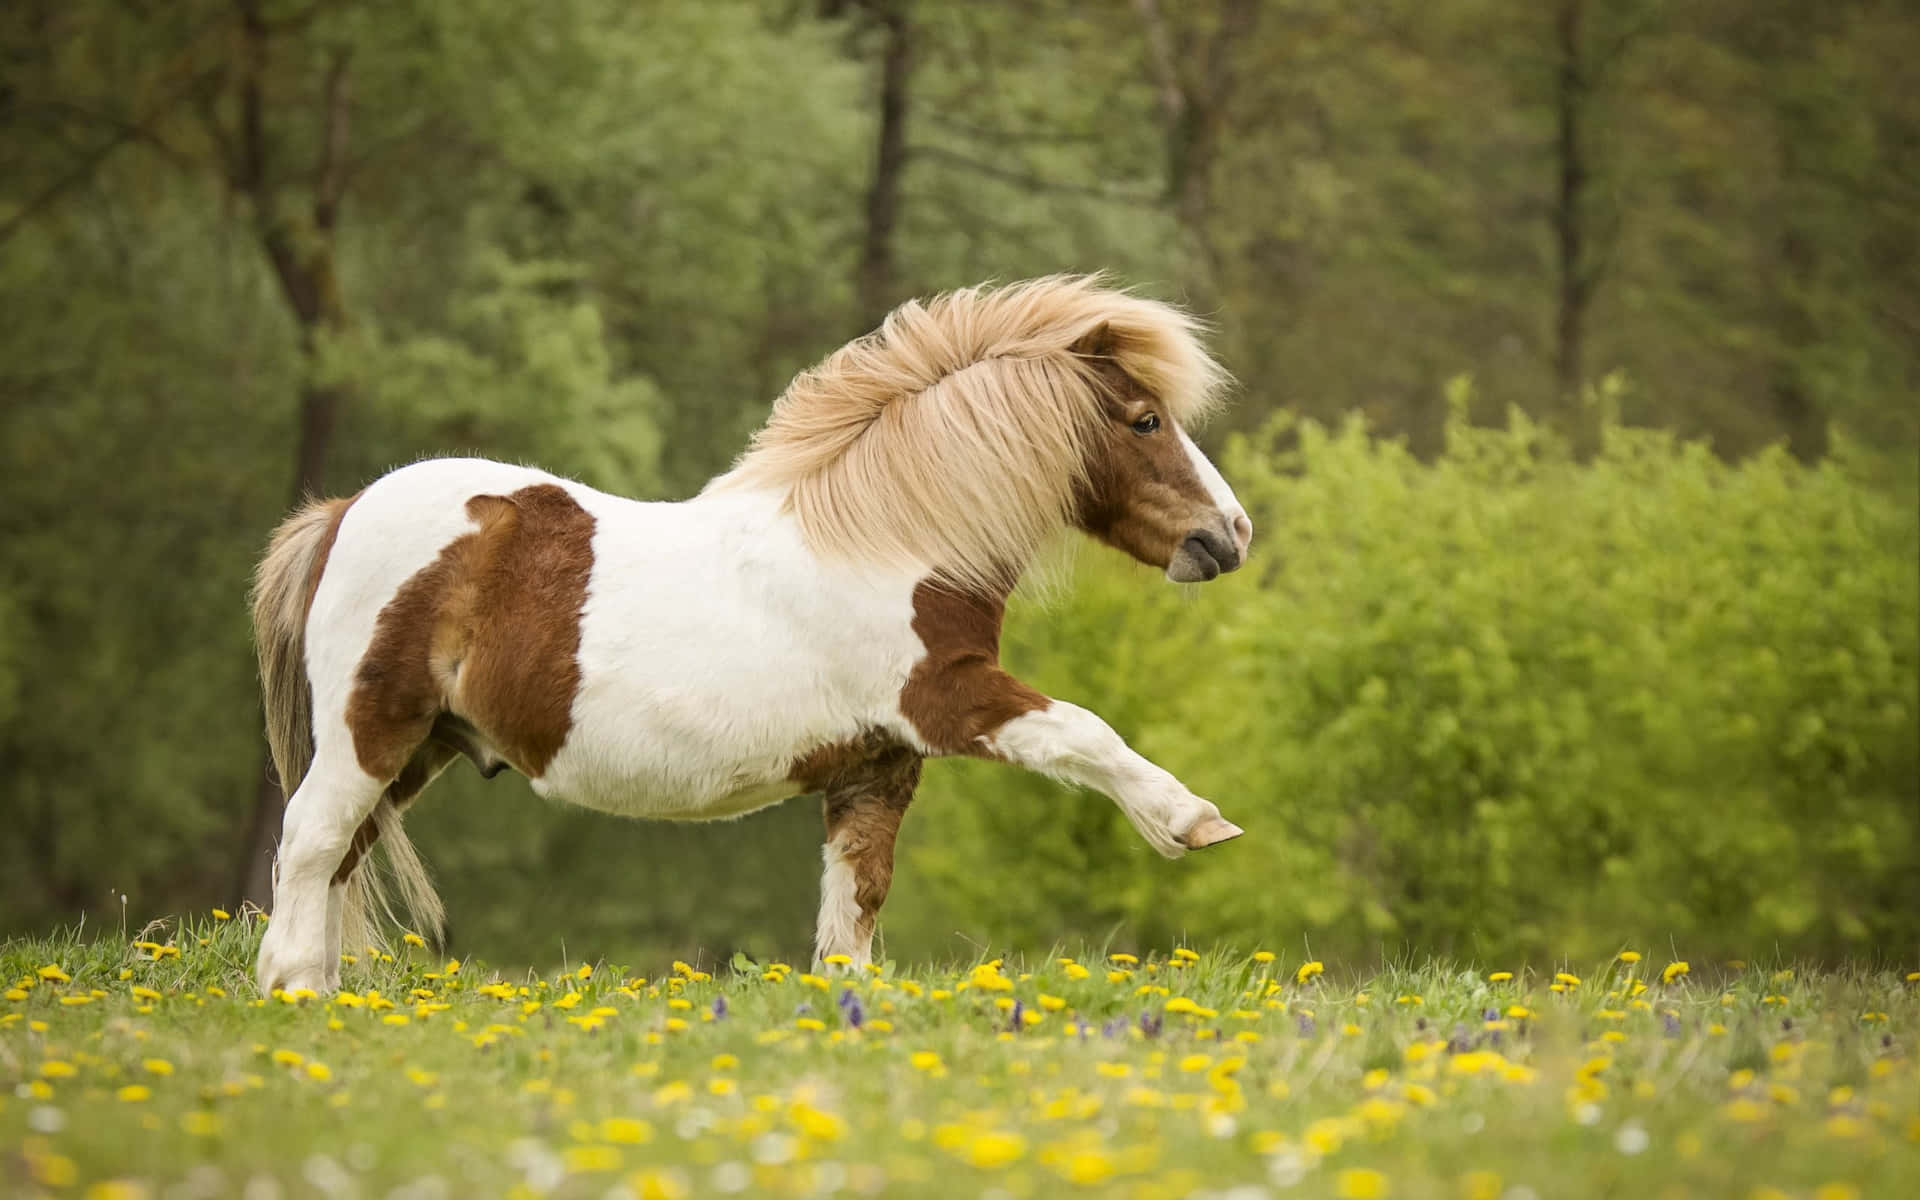 A Lovely Horse with A Flowing Mane